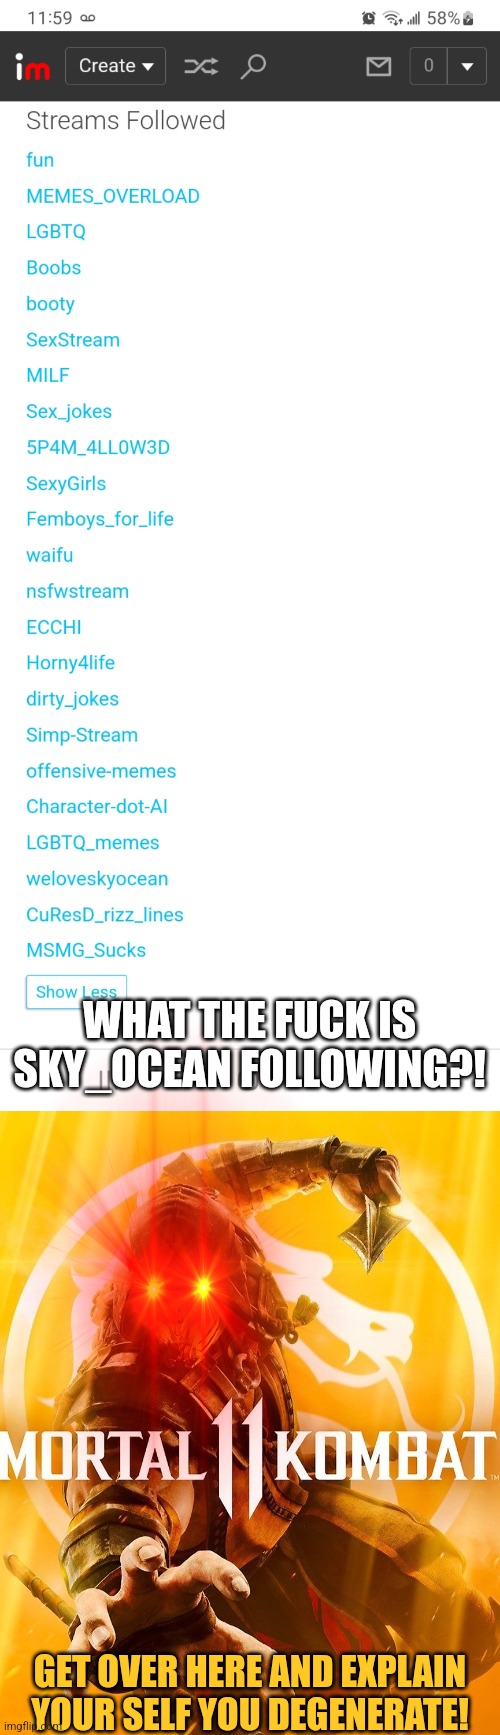 Wtf dude?!?! WHY IS HE INTO THAT SICK SHIT?!?!?! | WHAT THE FUCK IS SKY_OCEAN FOLLOWING?! GET OVER HERE AND EXPLAIN YOUR SELF YOU DEGENERATE! | image tagged in wtf,anti furry,furry,why does this exist | made w/ Imgflip meme maker